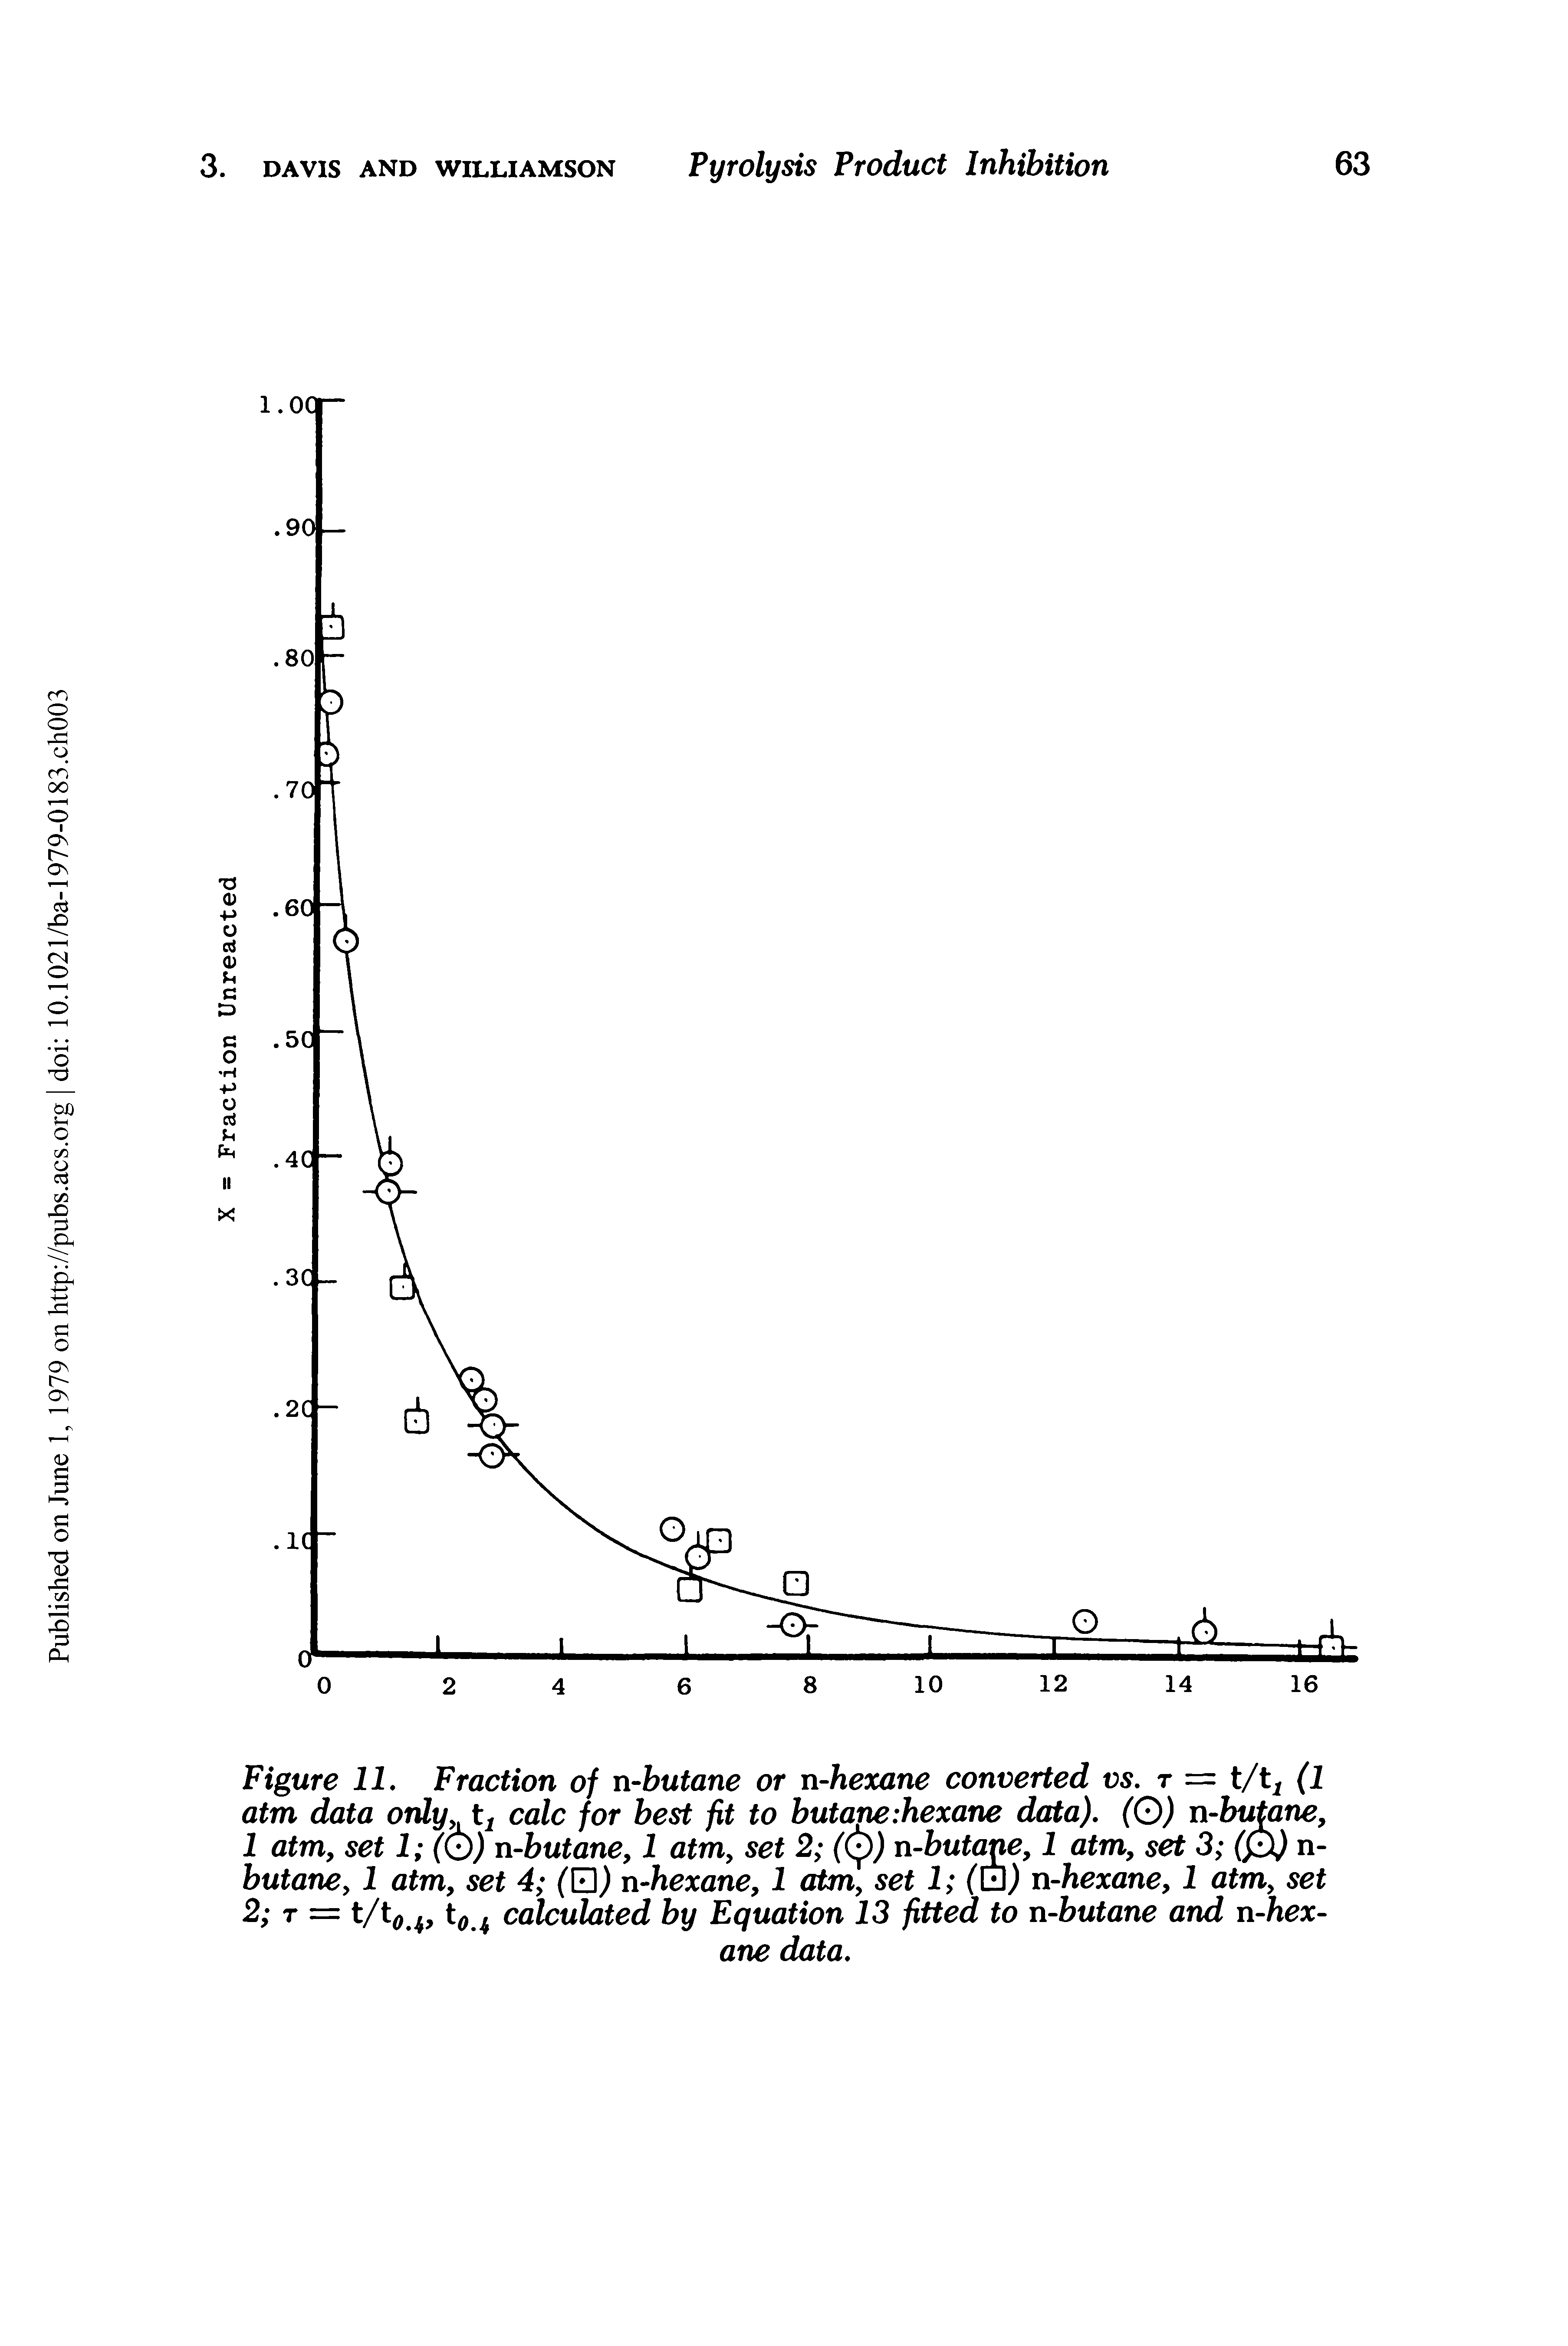 Figure 11. Fraction of n-butane or n-hexane converted vs. r = t/t1 (1 atm data only, t, calc for best fit to butane hexane data). (O) n-butane, 1 atm, set 1 (Q) n-butane, 1 atm, set 2 ((pj n-butane, 1 atm, set 3 (0) n-butane, 1 atm, set 4 ( ) n-hexane, 1 atm, set 1 ( ) n-hexane, 1 atm, set 2 t = t0 k calculated by Equation 13 fitted to n-butane and n-hexane data.